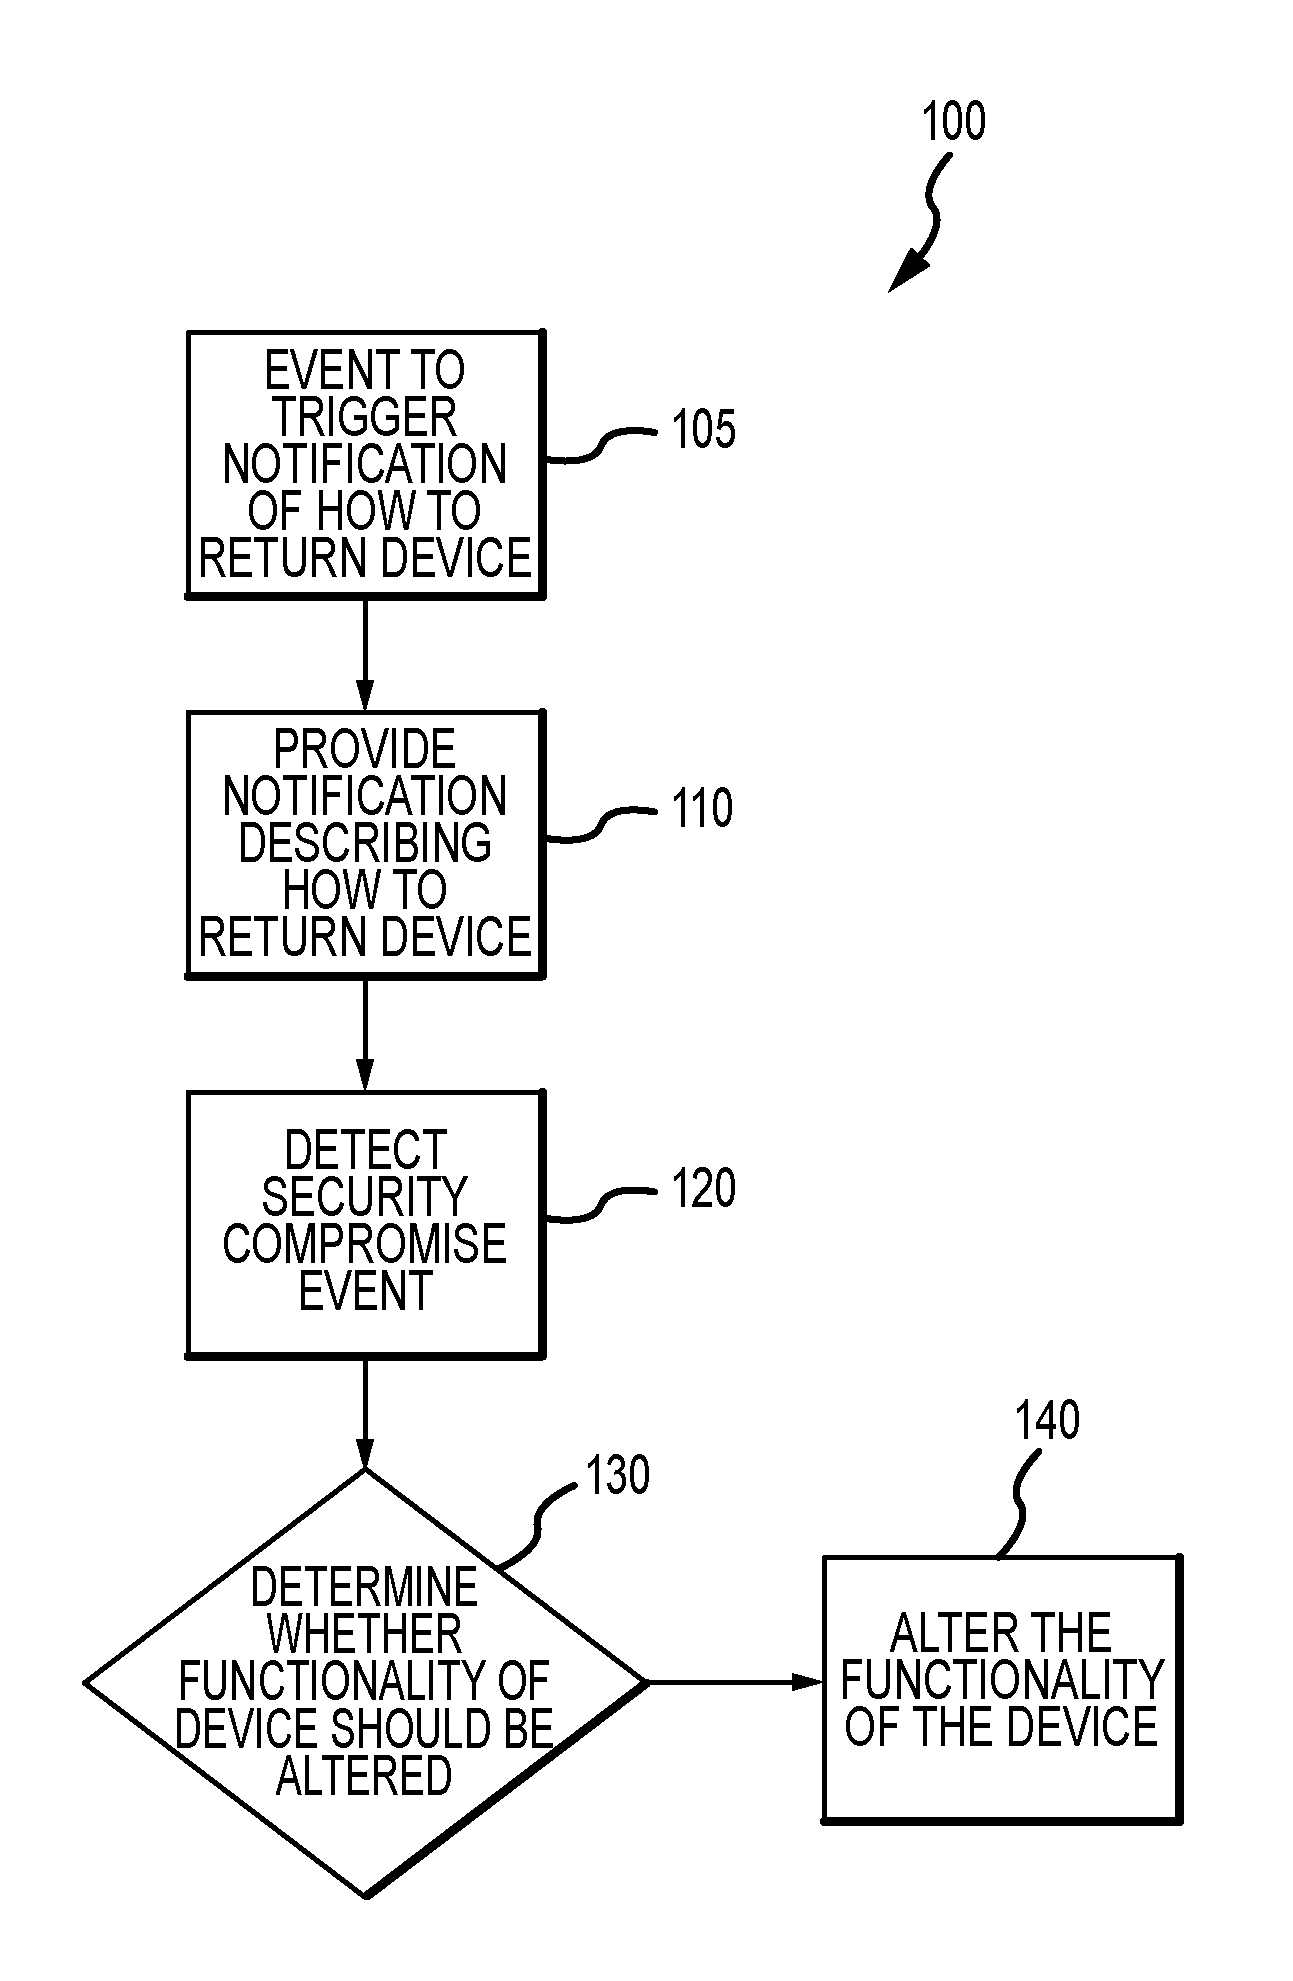 Systems and methods for mitigating the unauthorized use of a device